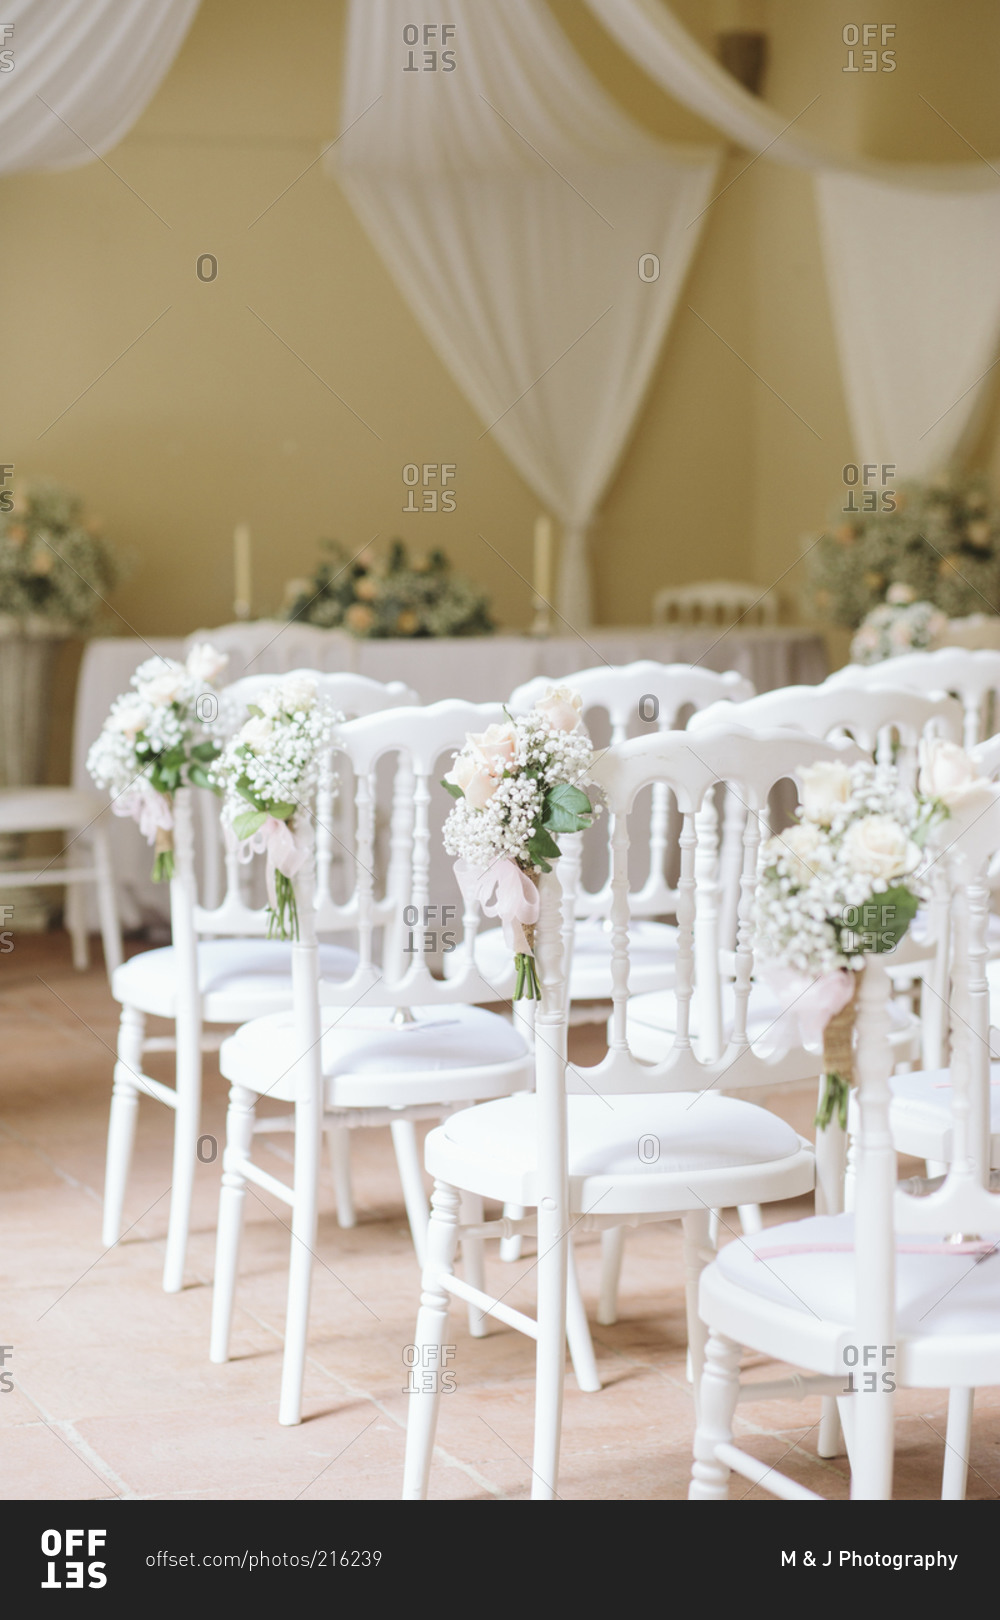 Chairs lined up with flowers for wedding